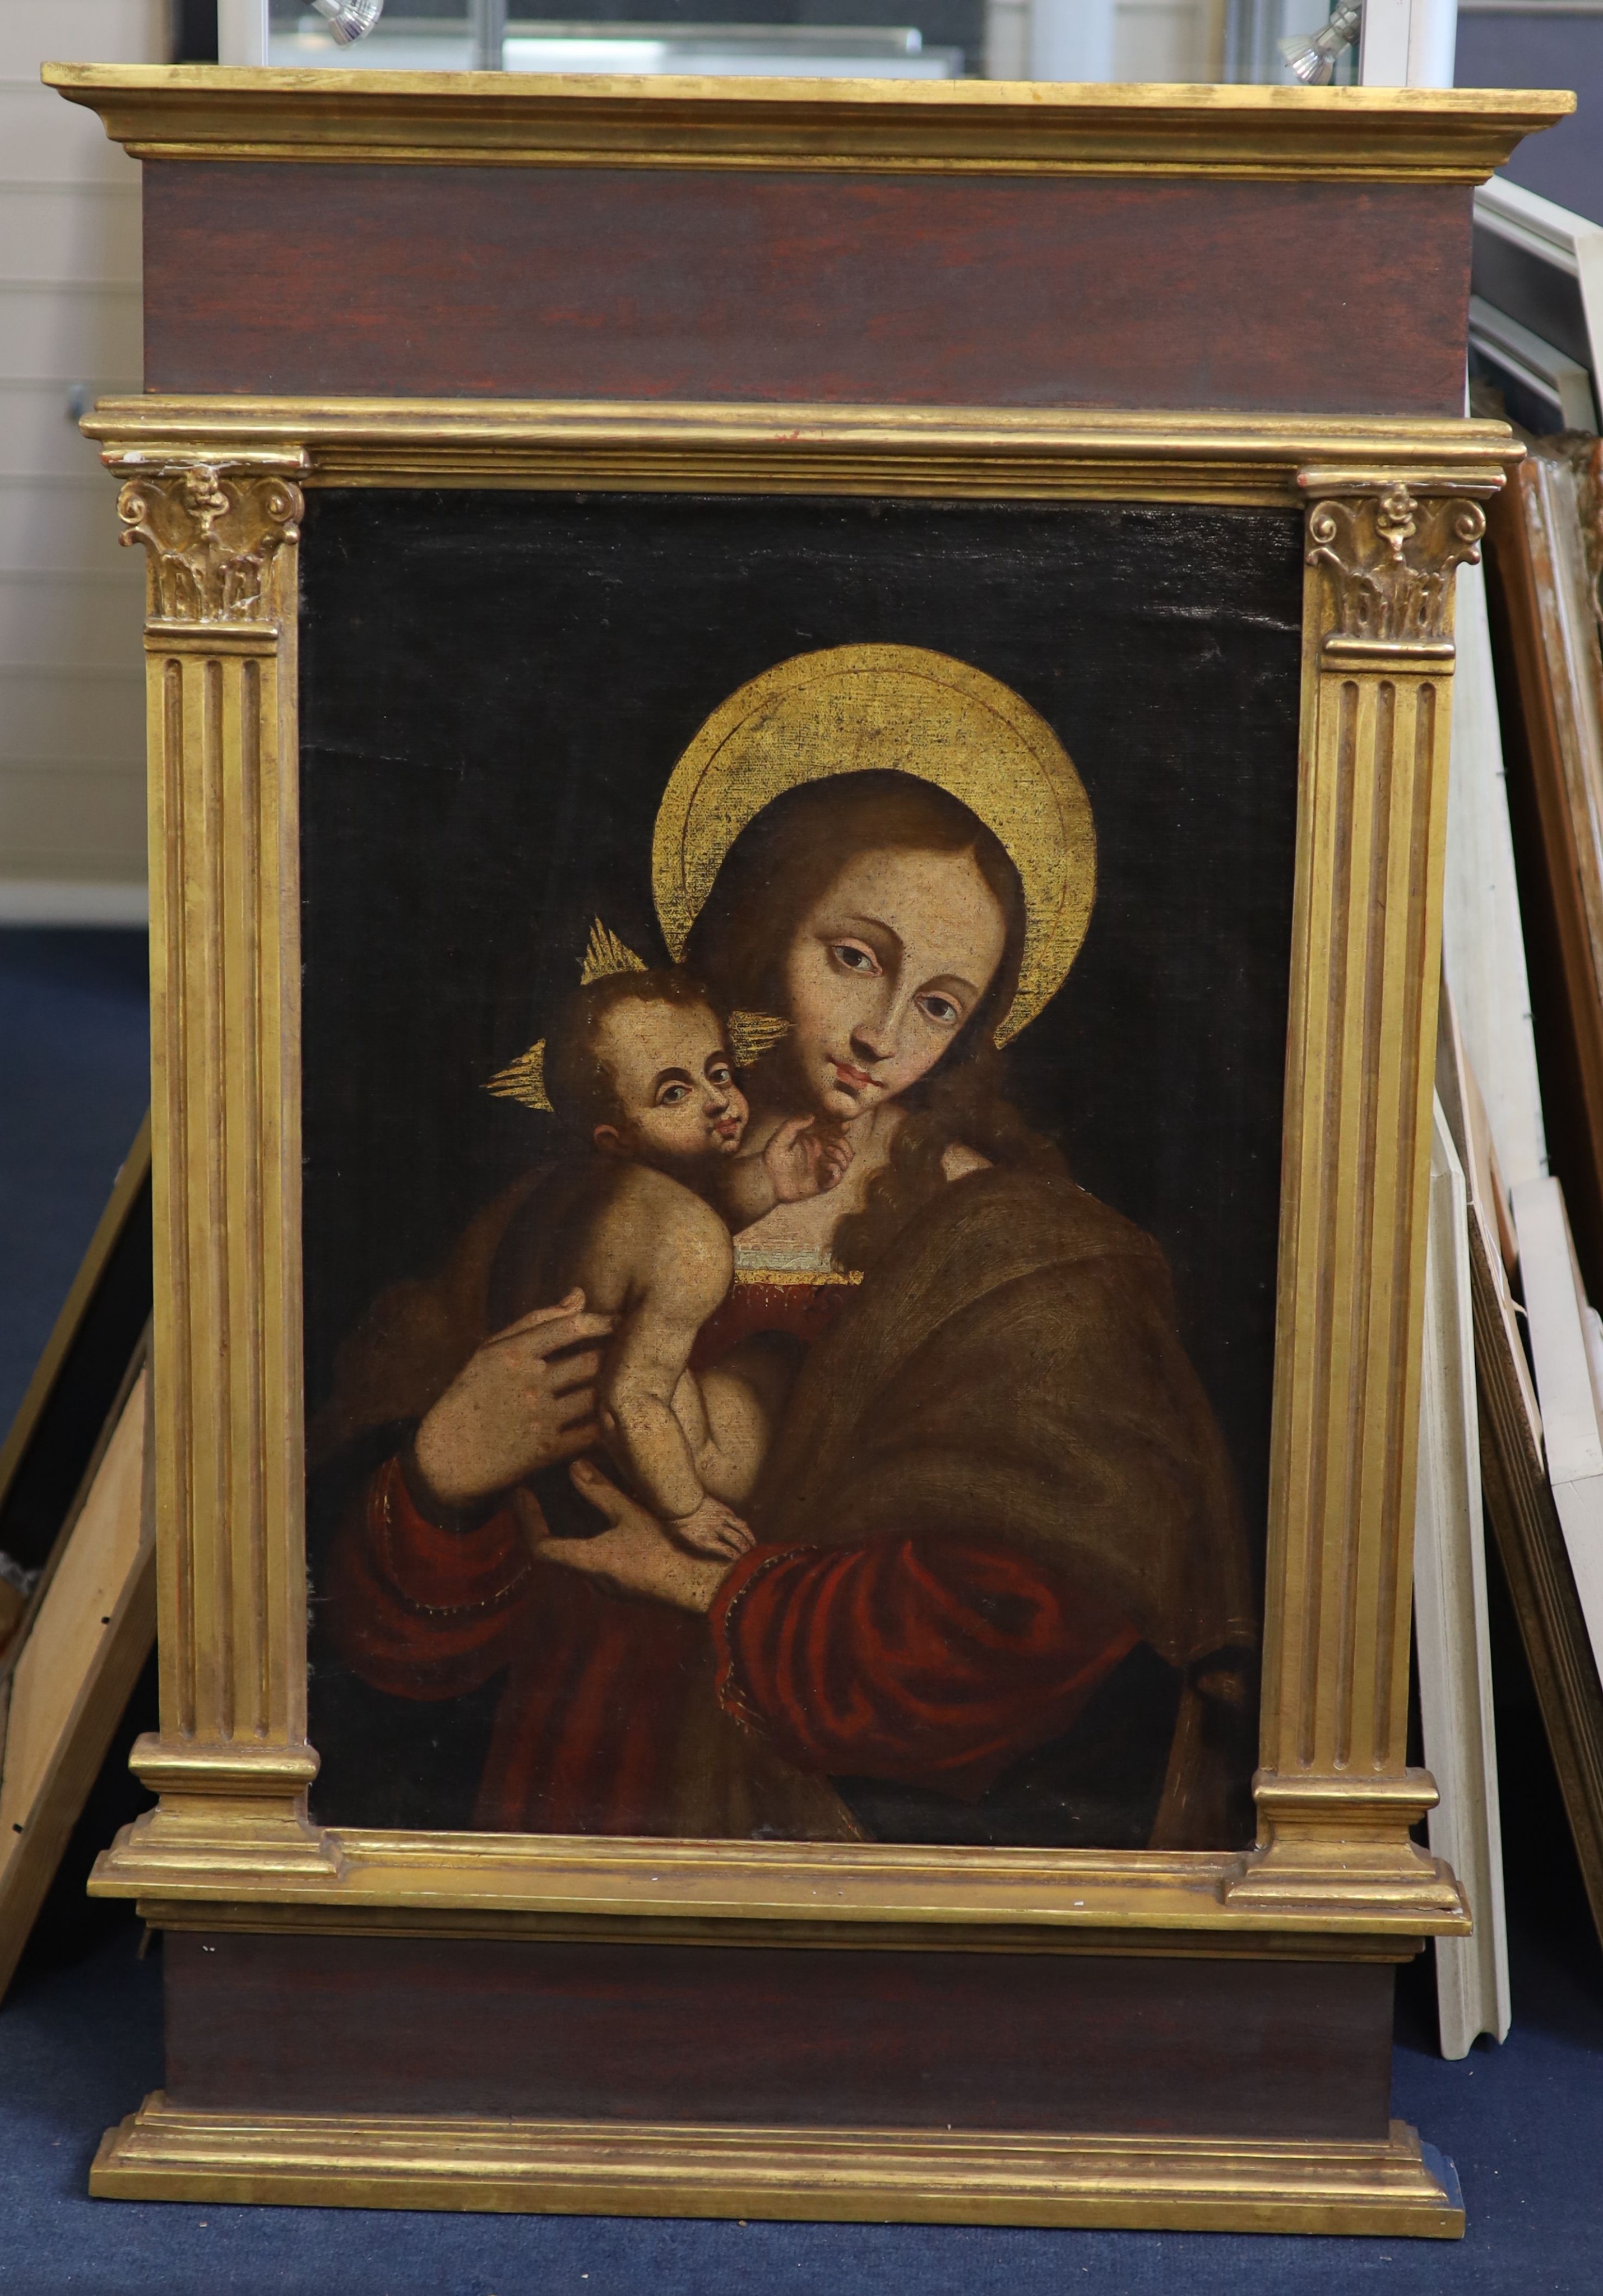 16th century style Italian School , Madonna and child, oil on canvas, 70 x 49cm, housed in an ornate Tabernacle style frame